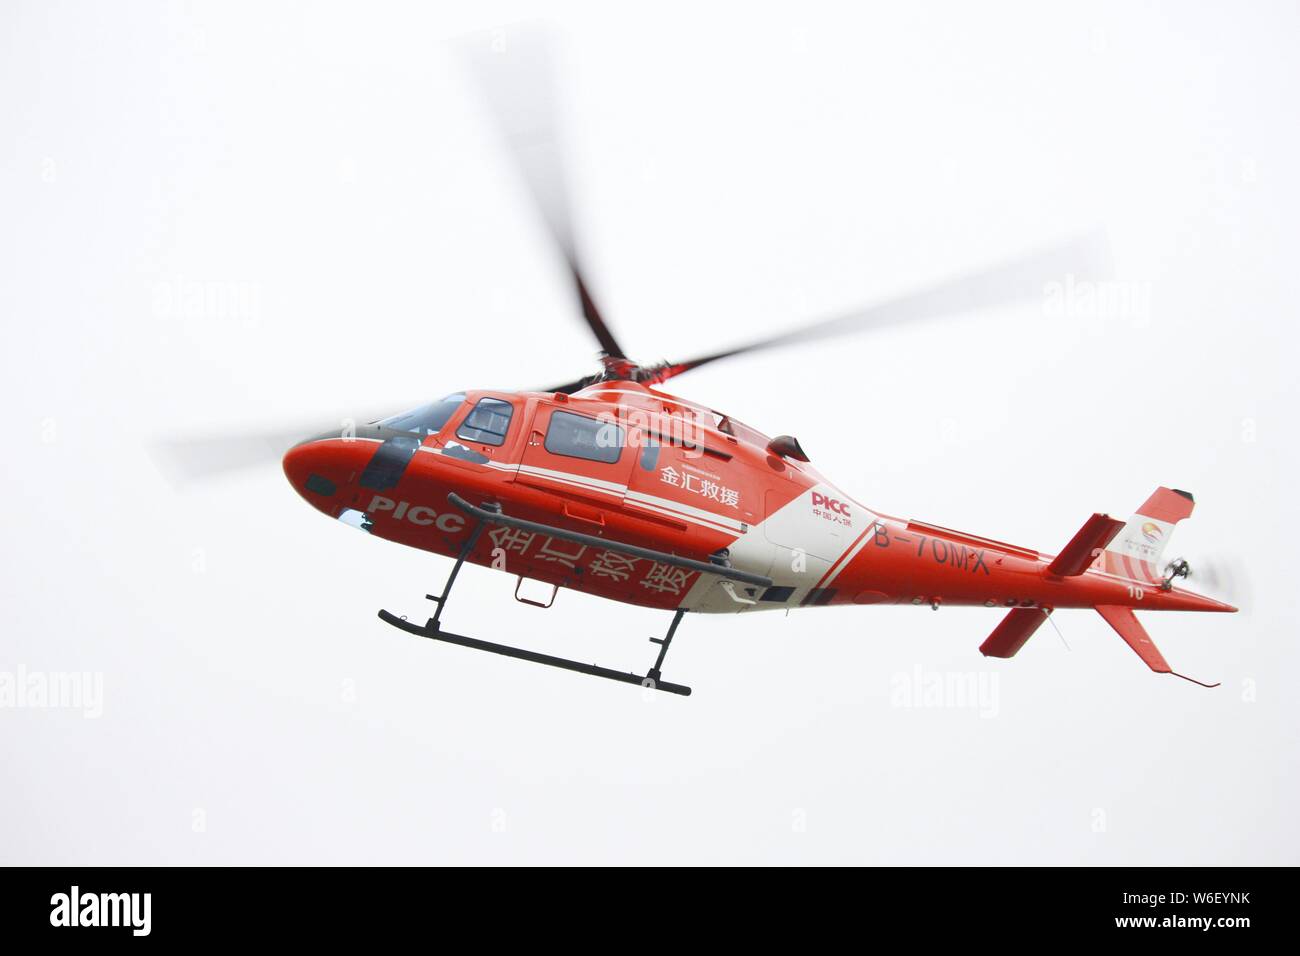 A medical helicopter to offer free air medical services takes off in Zhengzhou city, central China's Henan province, 20 March 2018.    A hospital in c Stock Photo